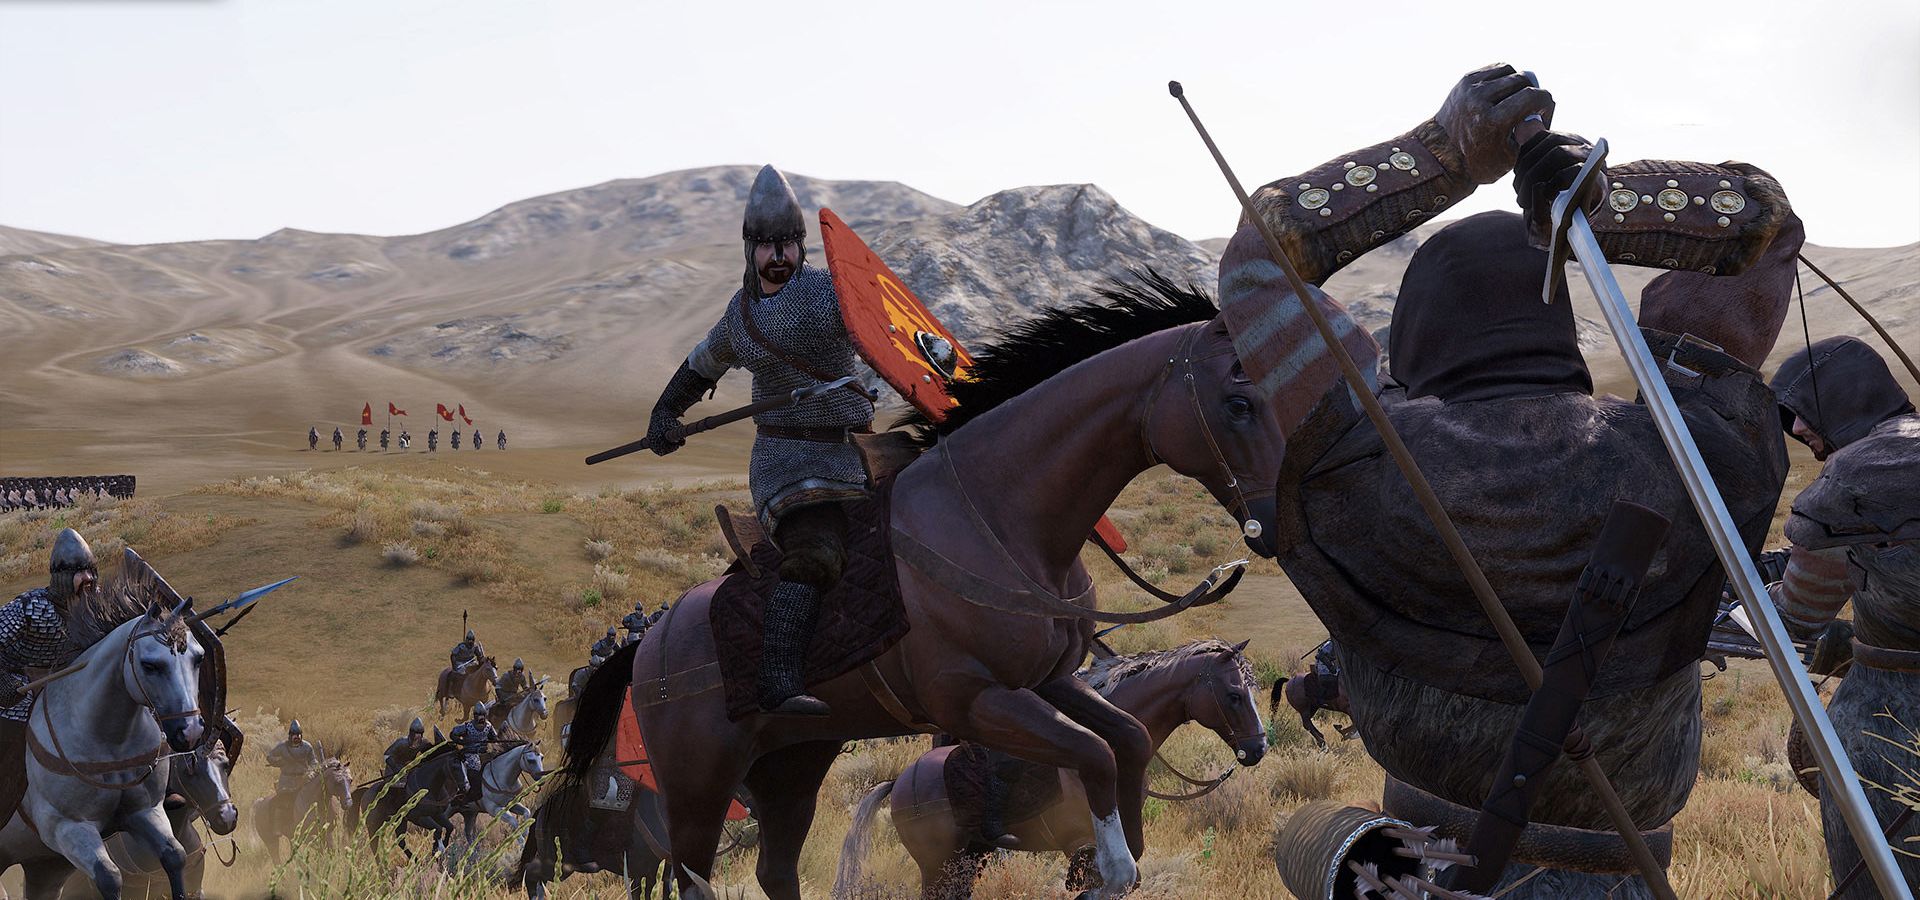 In this article, we are going to be covering the Mount and Blade 2 Bannerlord Sandbox mode, what it is, how it works, and everything else that you need to know about it.